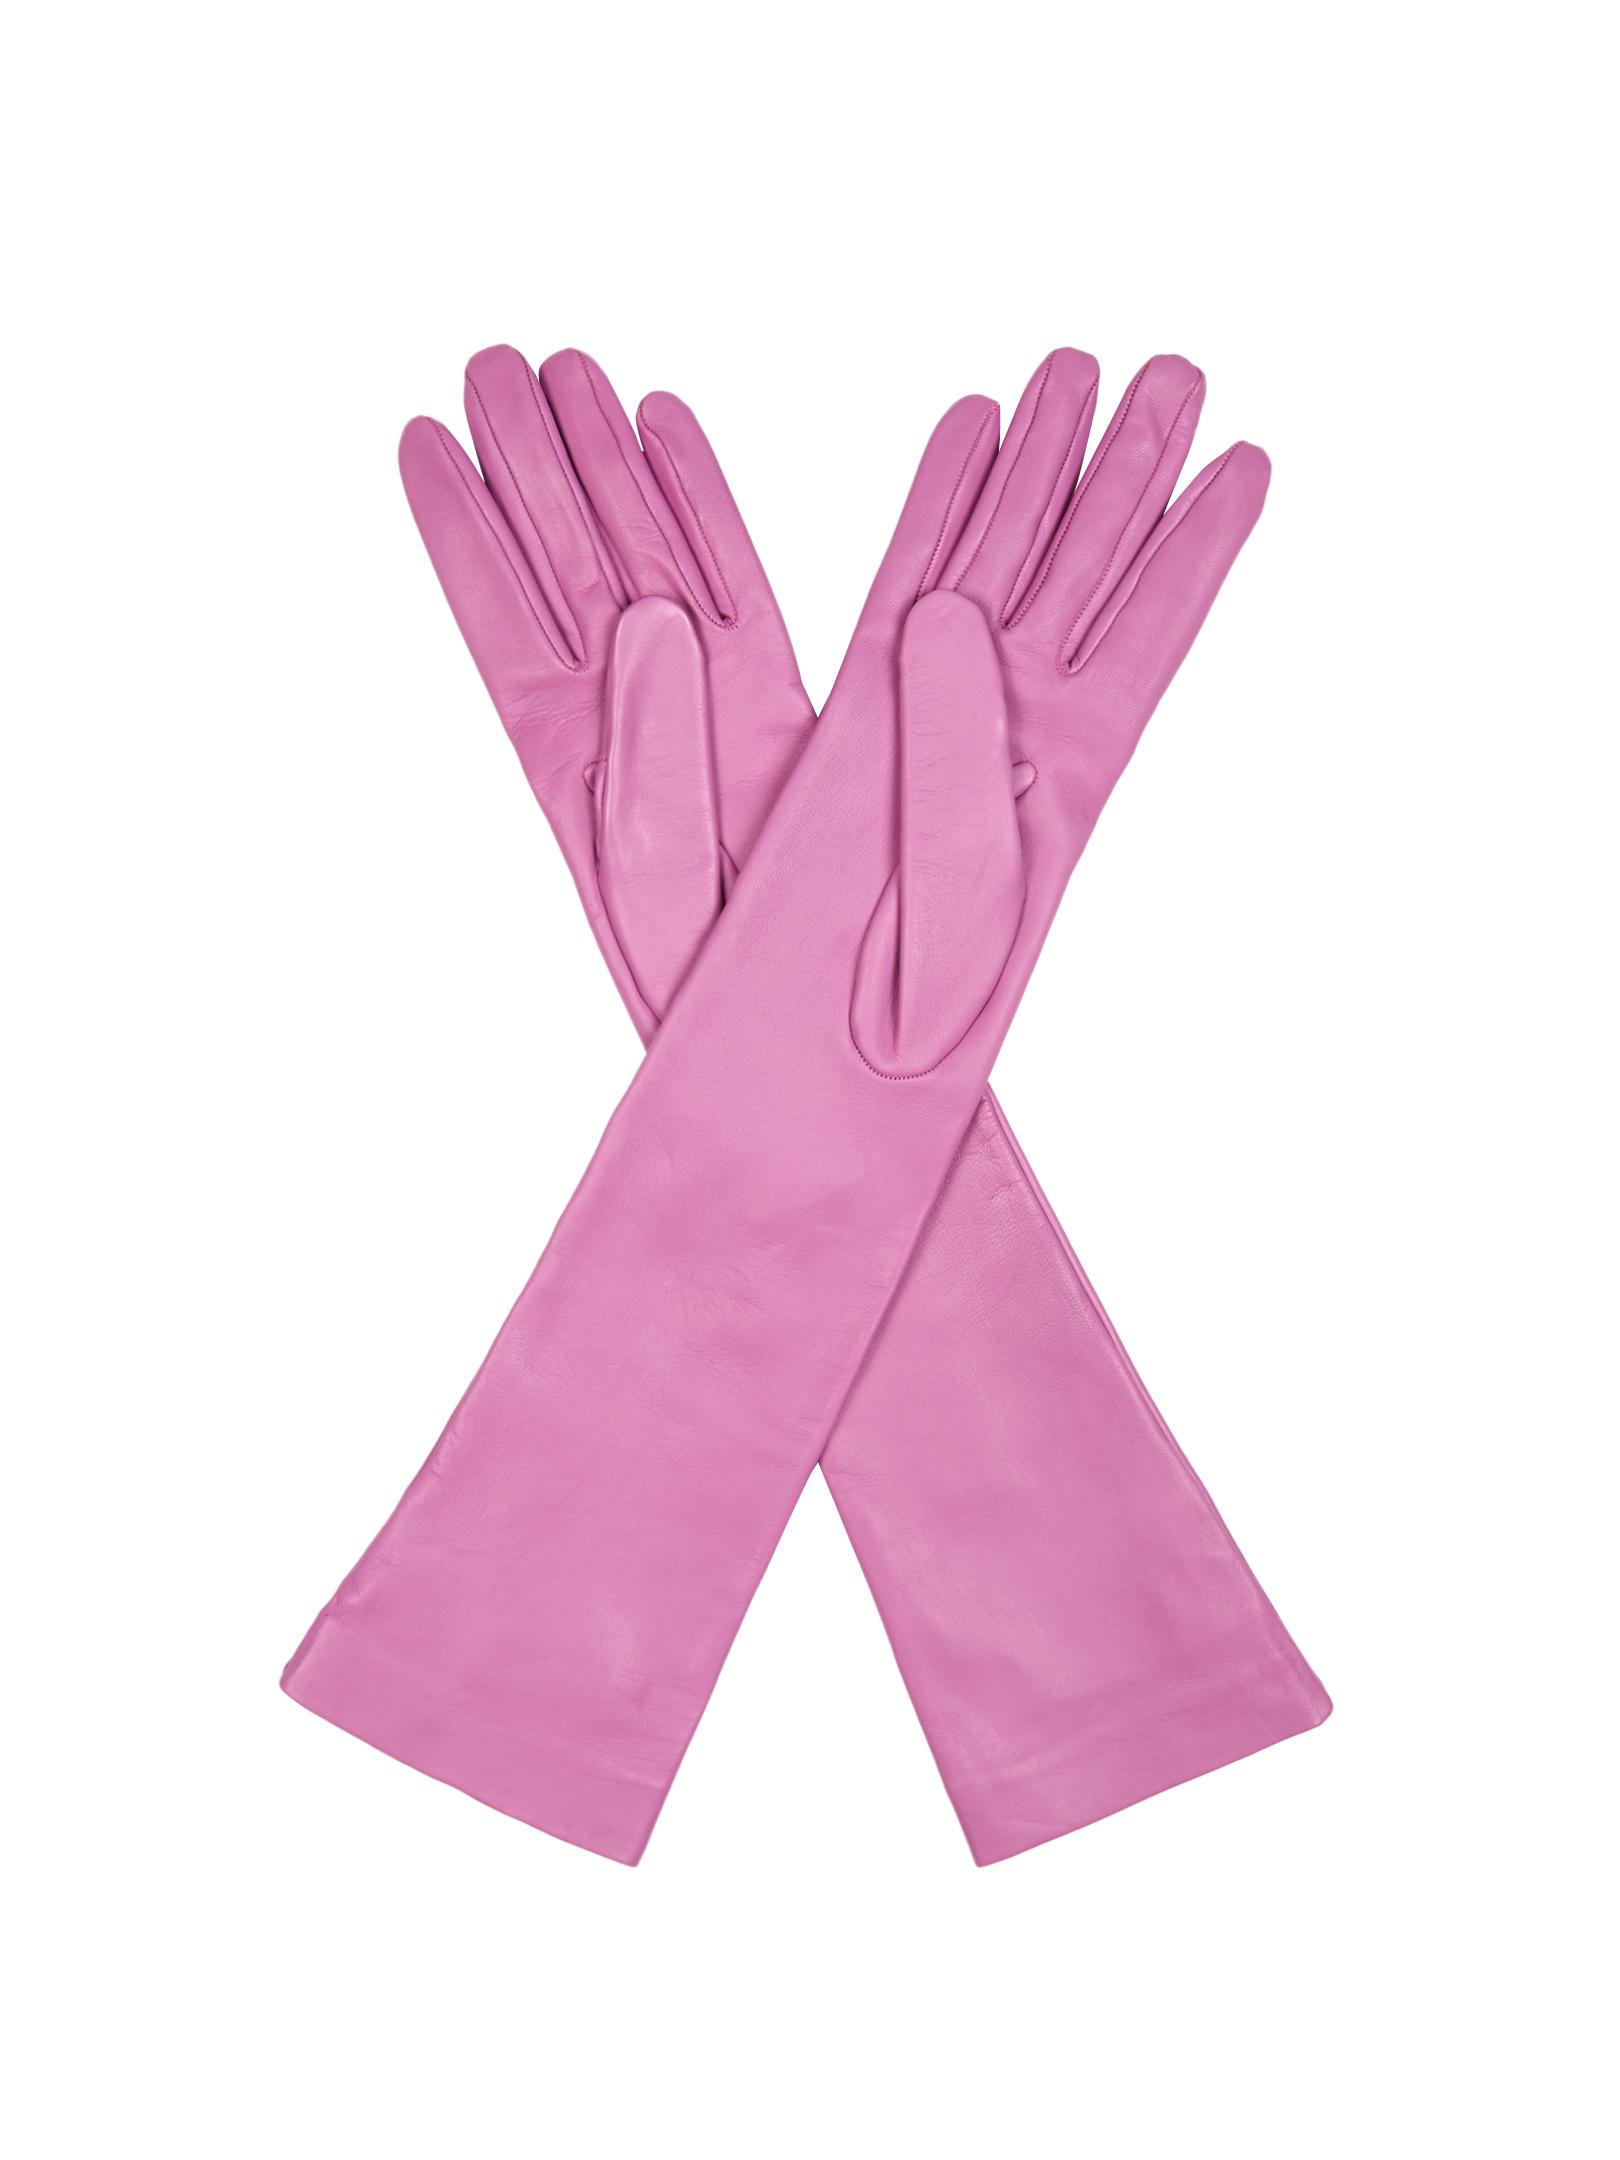 Gucci Elbow-length Leather Gloves in Pink - Lyst